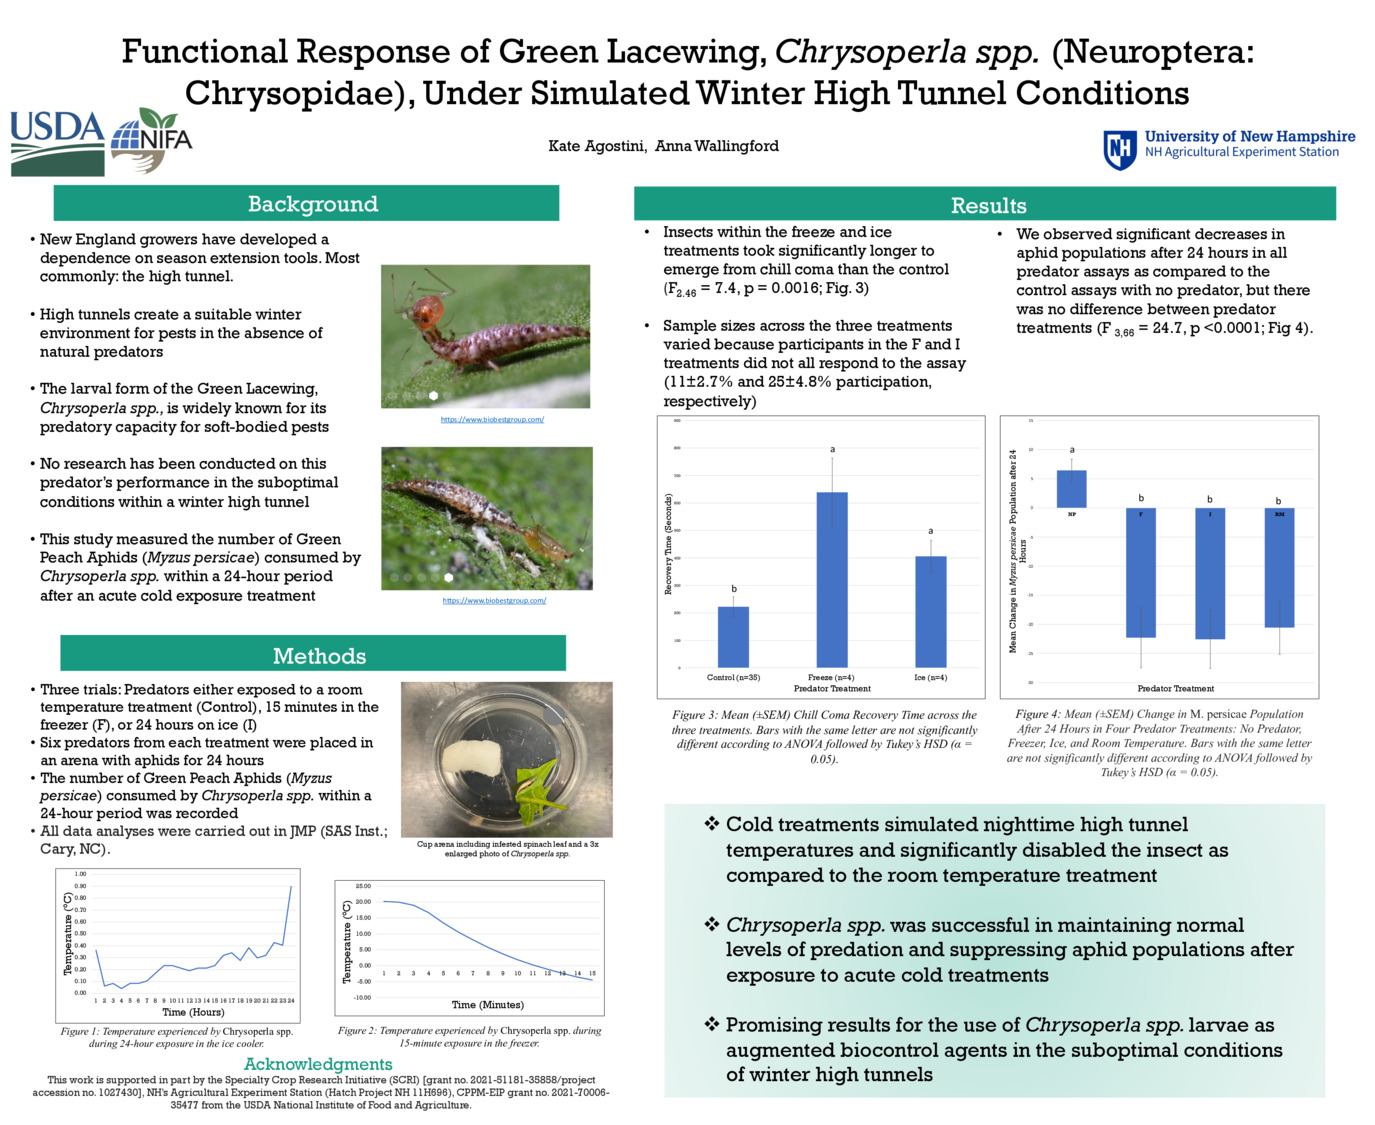 Functional Response Of Green Lacewing, Chrysoperla Spp. (Neuroptera: Chrysopidae) Under Simulated Winter High Tunnel Conditions by kateagostini